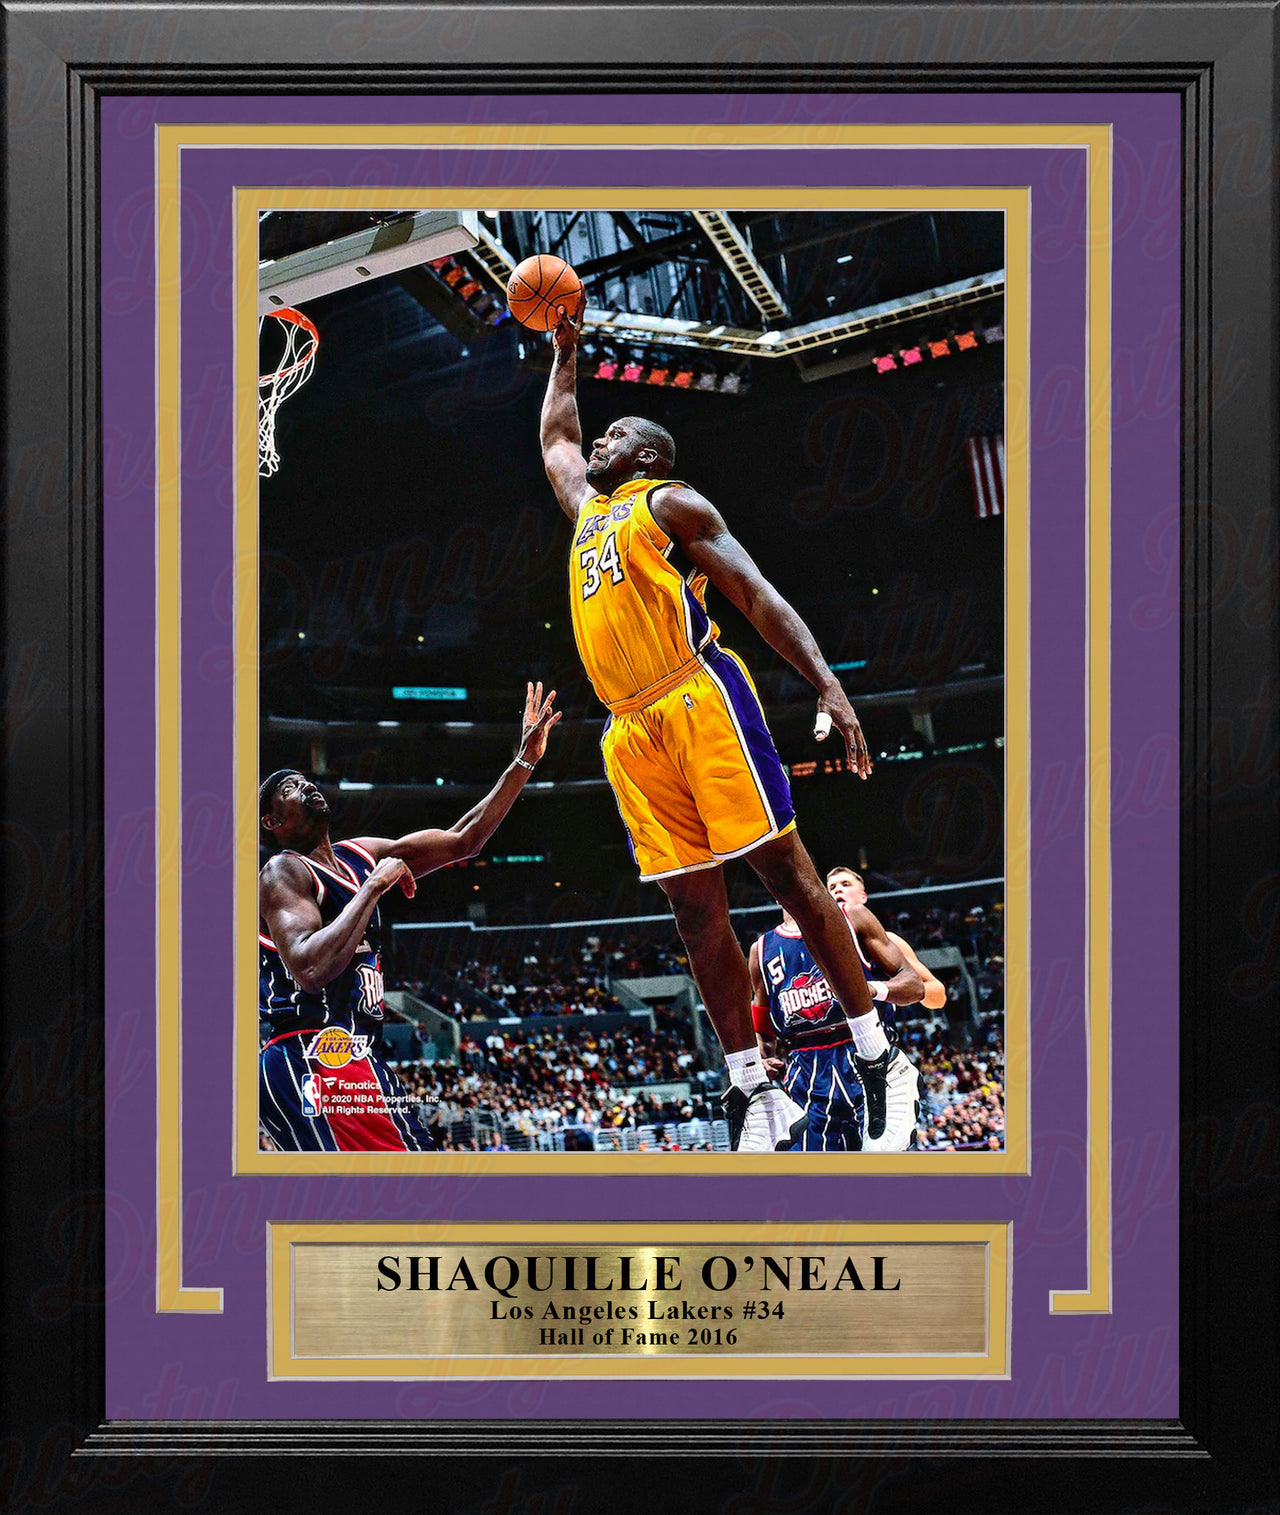 Shaquille O'Neal v. Rockets Los Angeles Lakers 8" x 10" Framed Basketball Photo - Dynasty Sports & Framing 